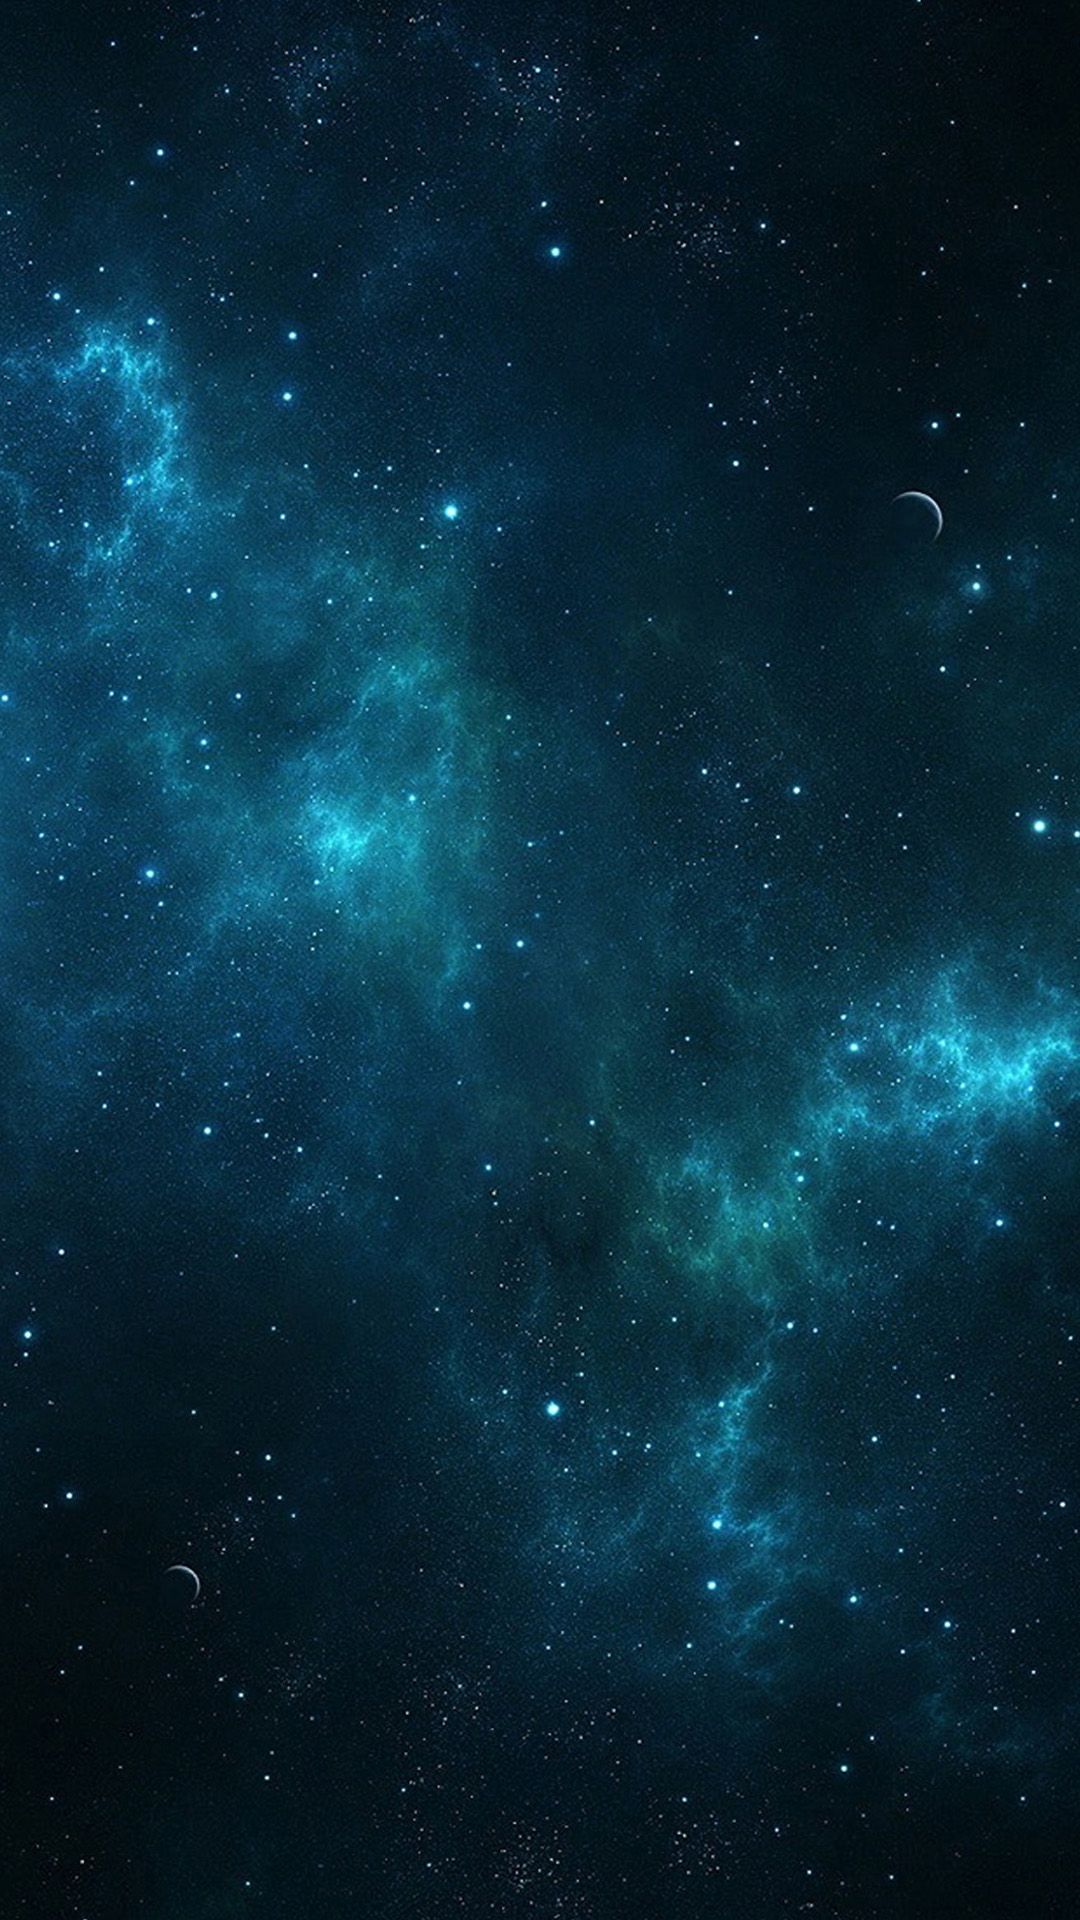 HD Space Wallpaper IPhone